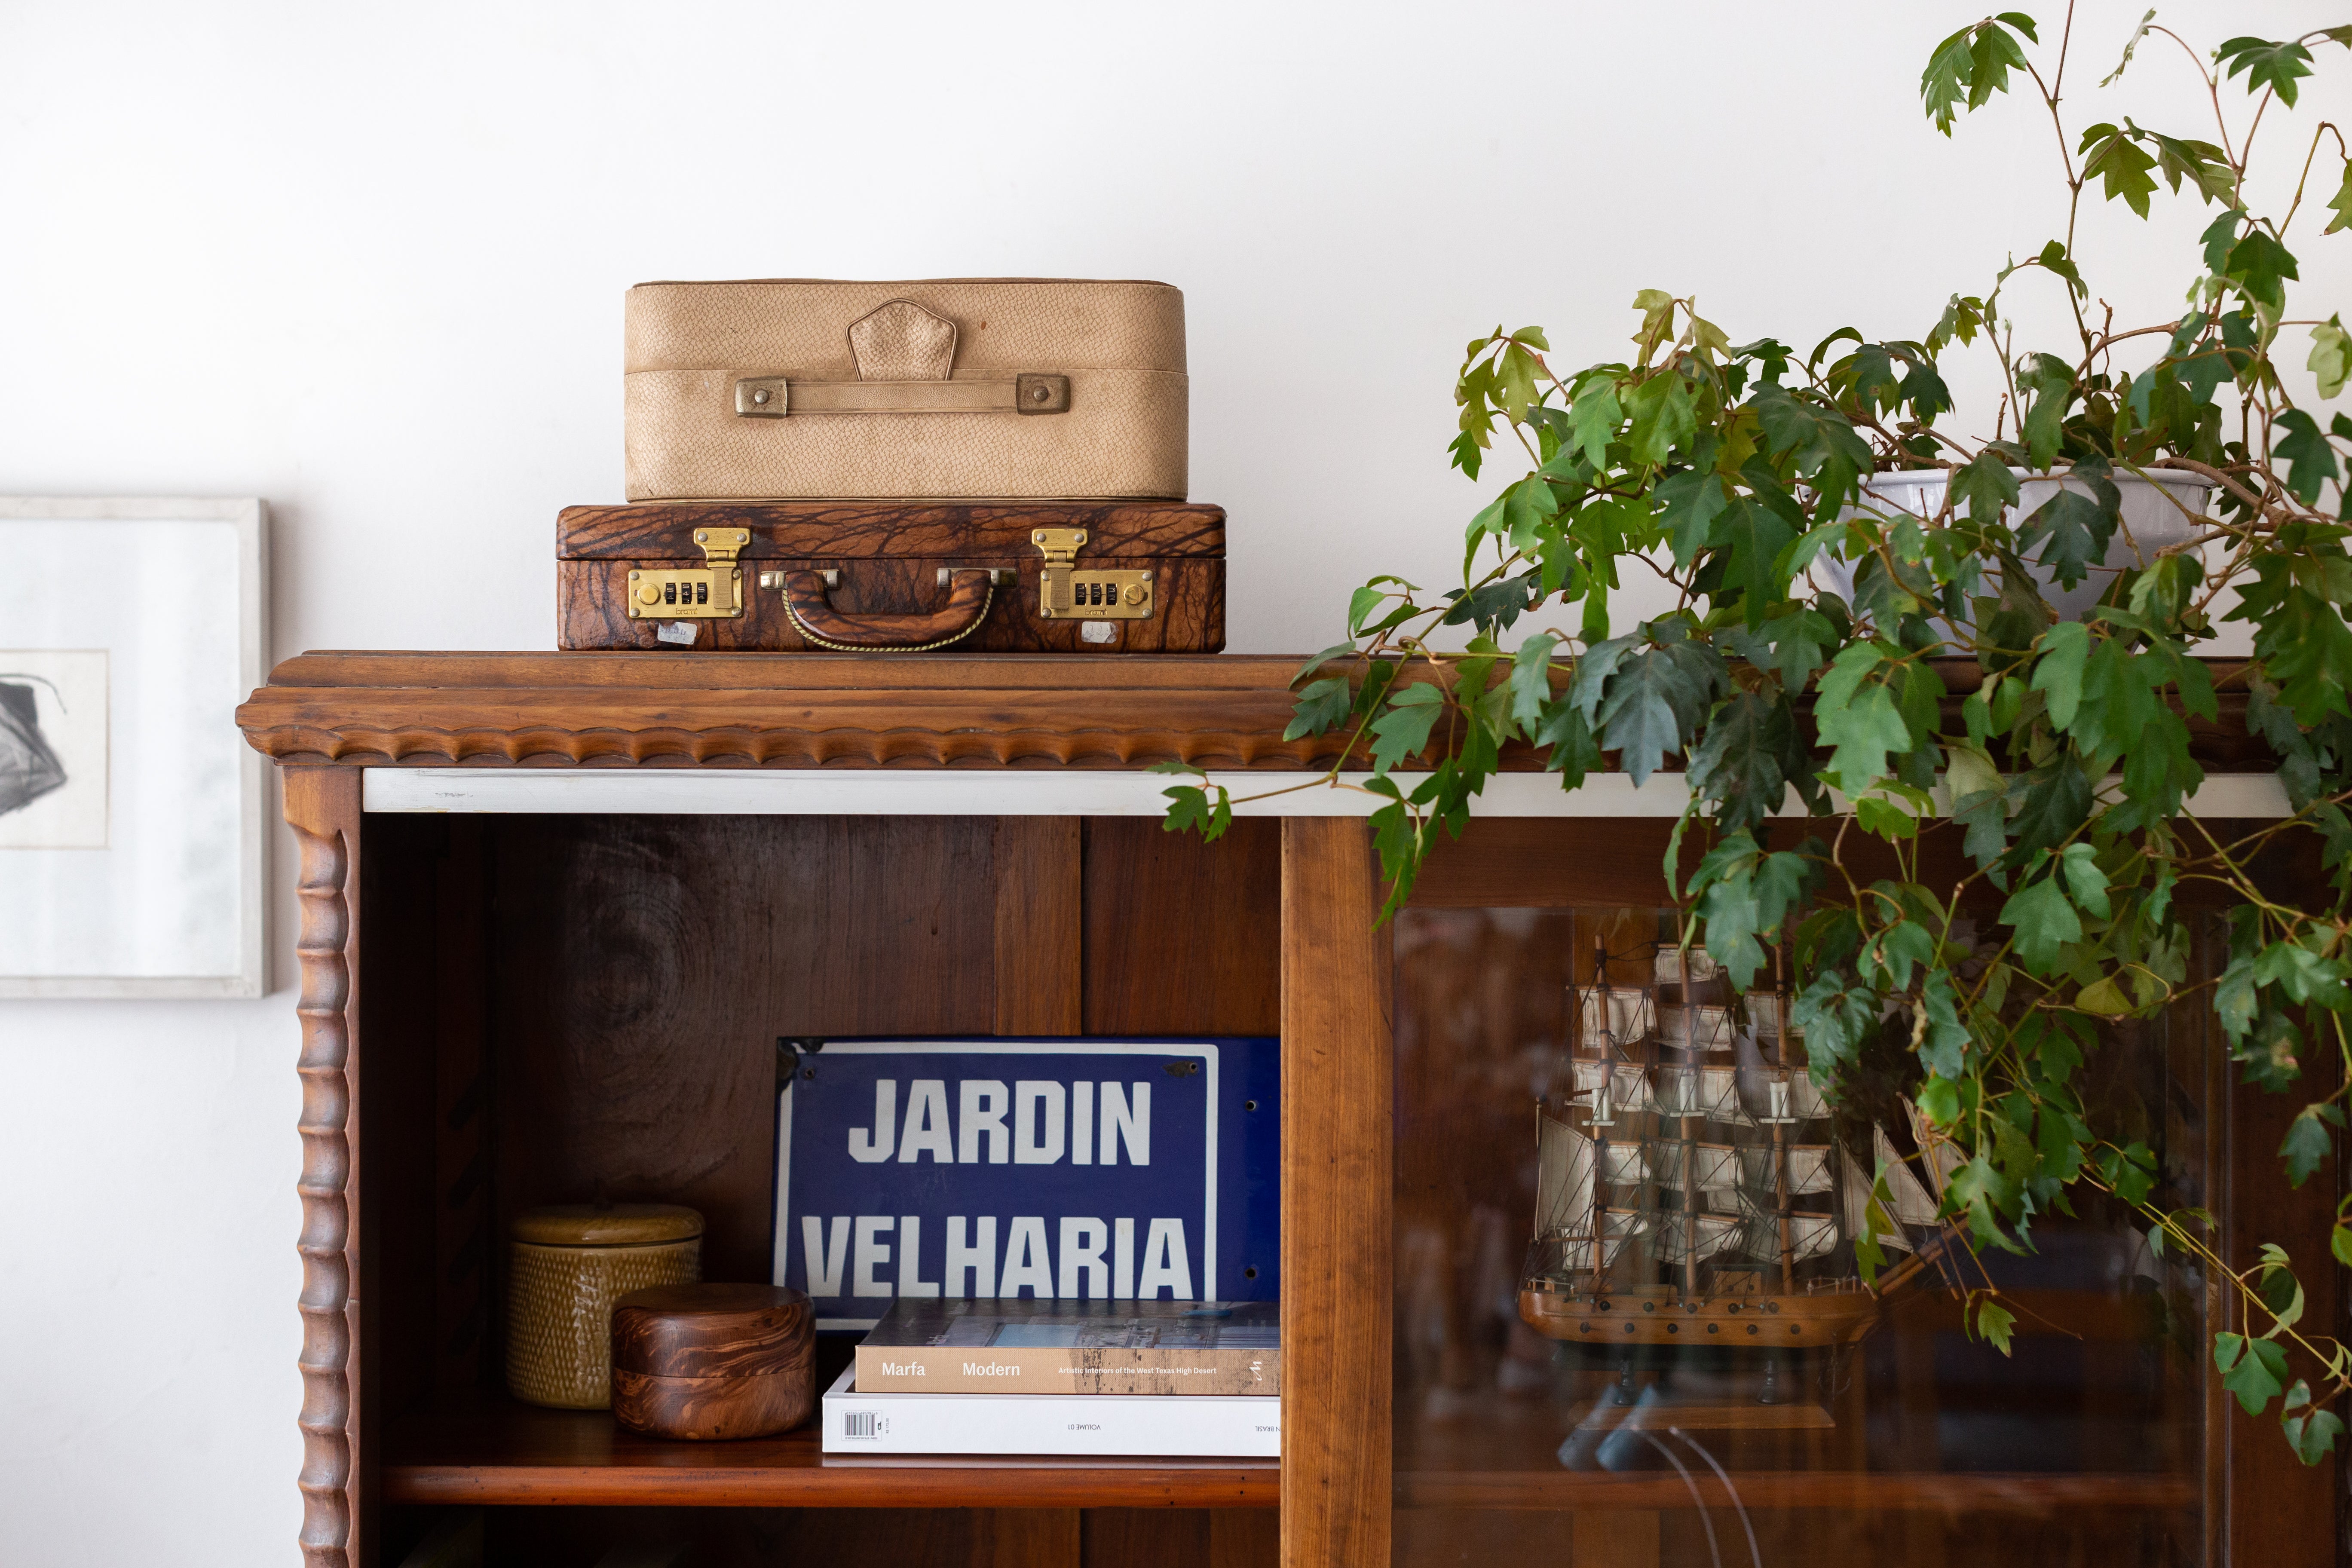 The Jardin Velharia, by Stories from Home